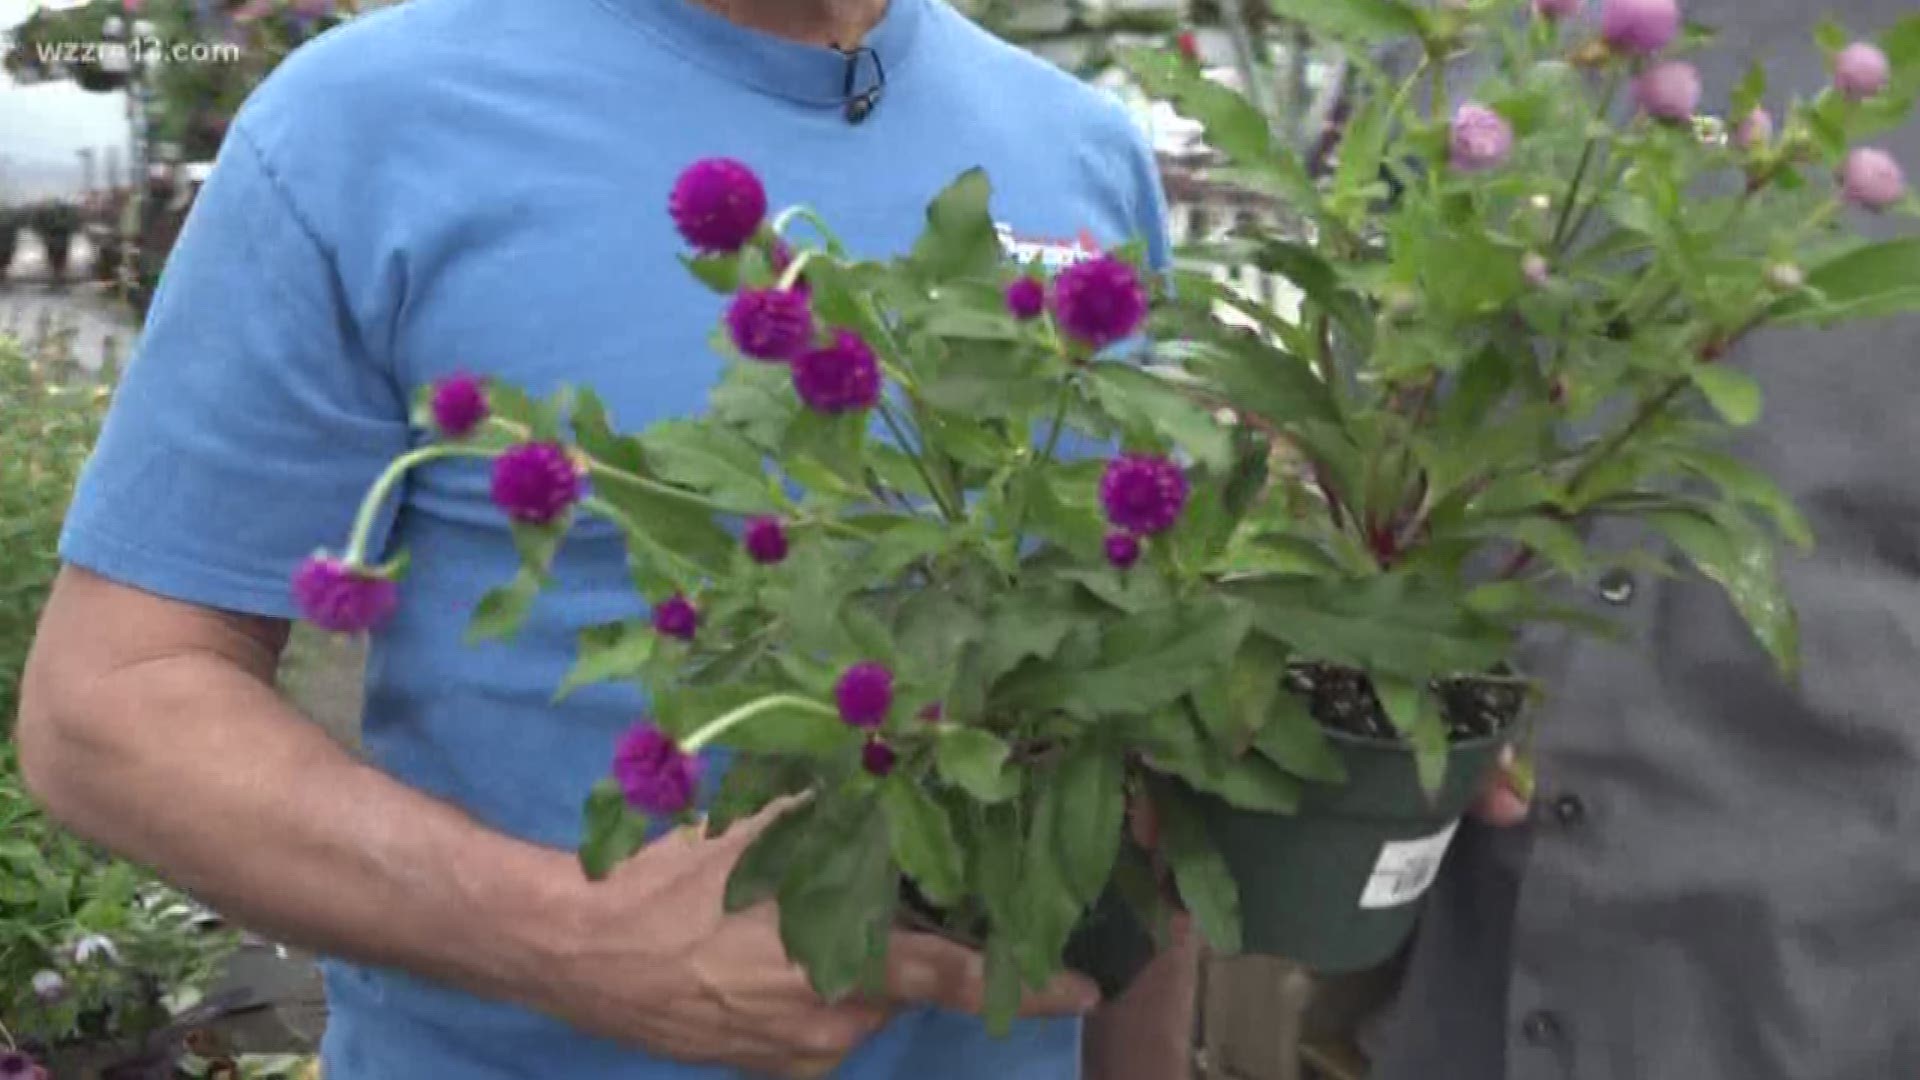 Our Greenthumb Expert Rick Vuyst guides us to the register, showing us what he would buy if he was shopping for his garden.